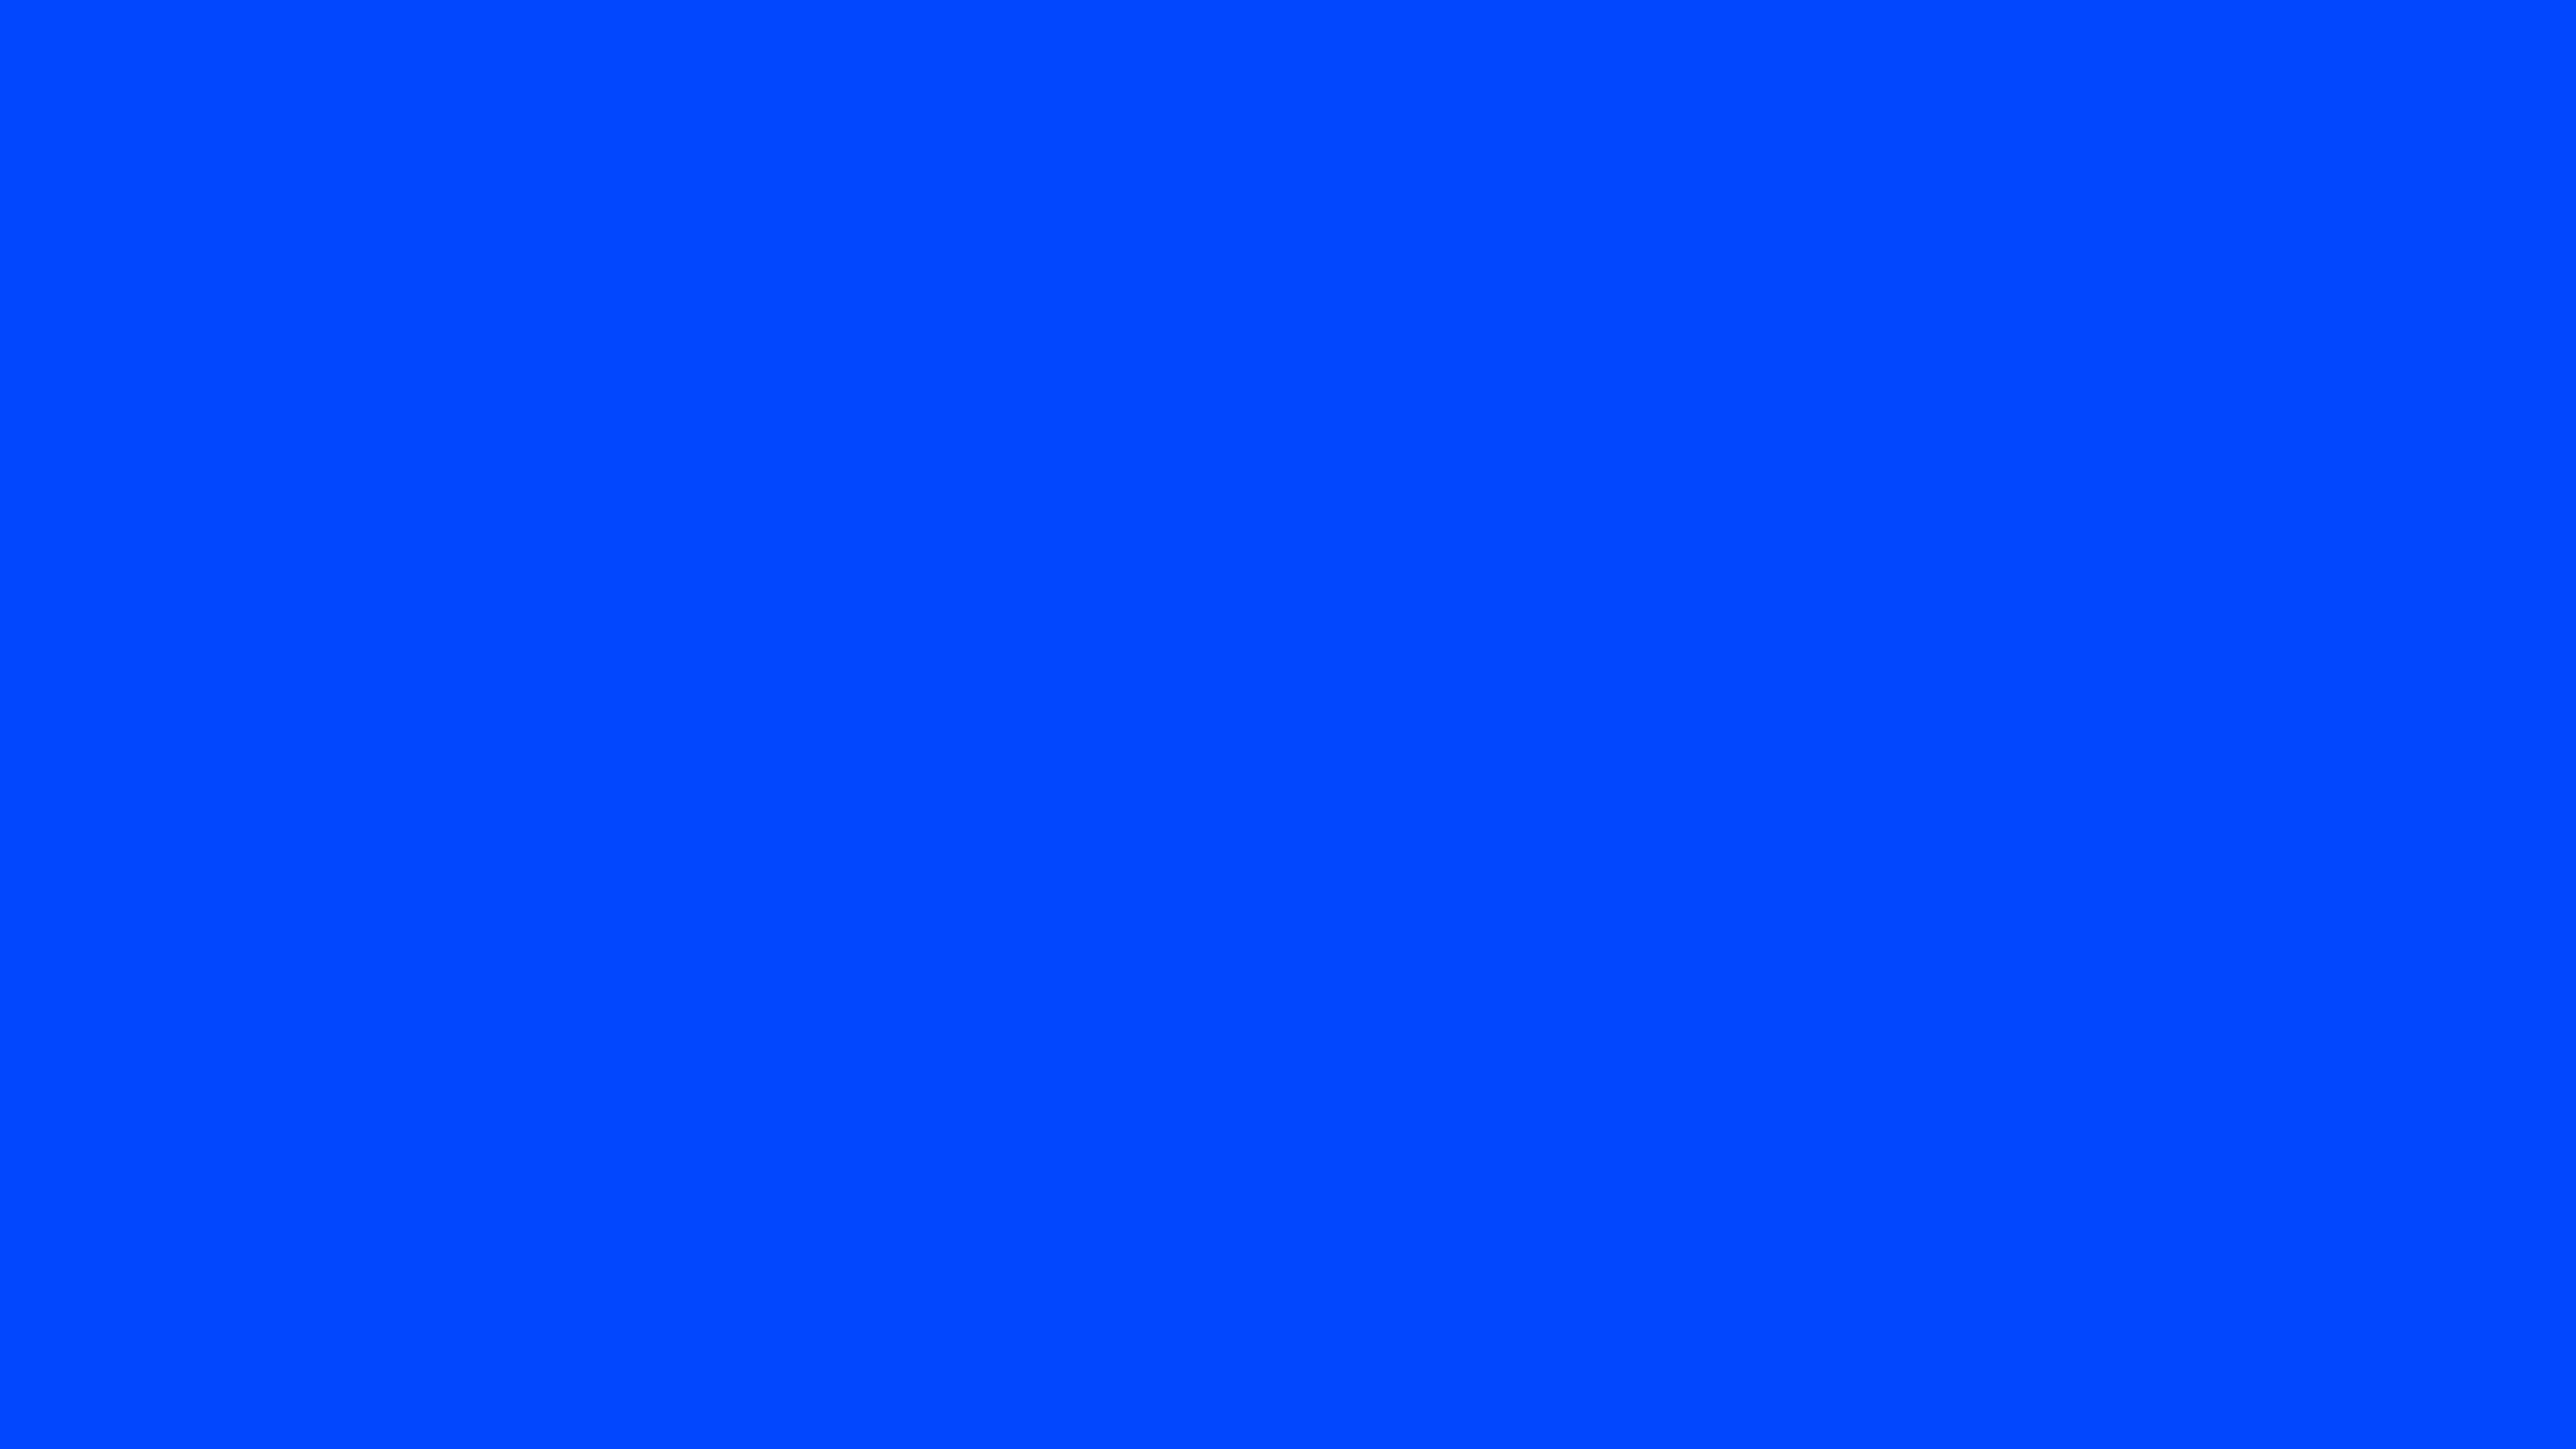 4096x2304 Blue RYB Solid Color Background